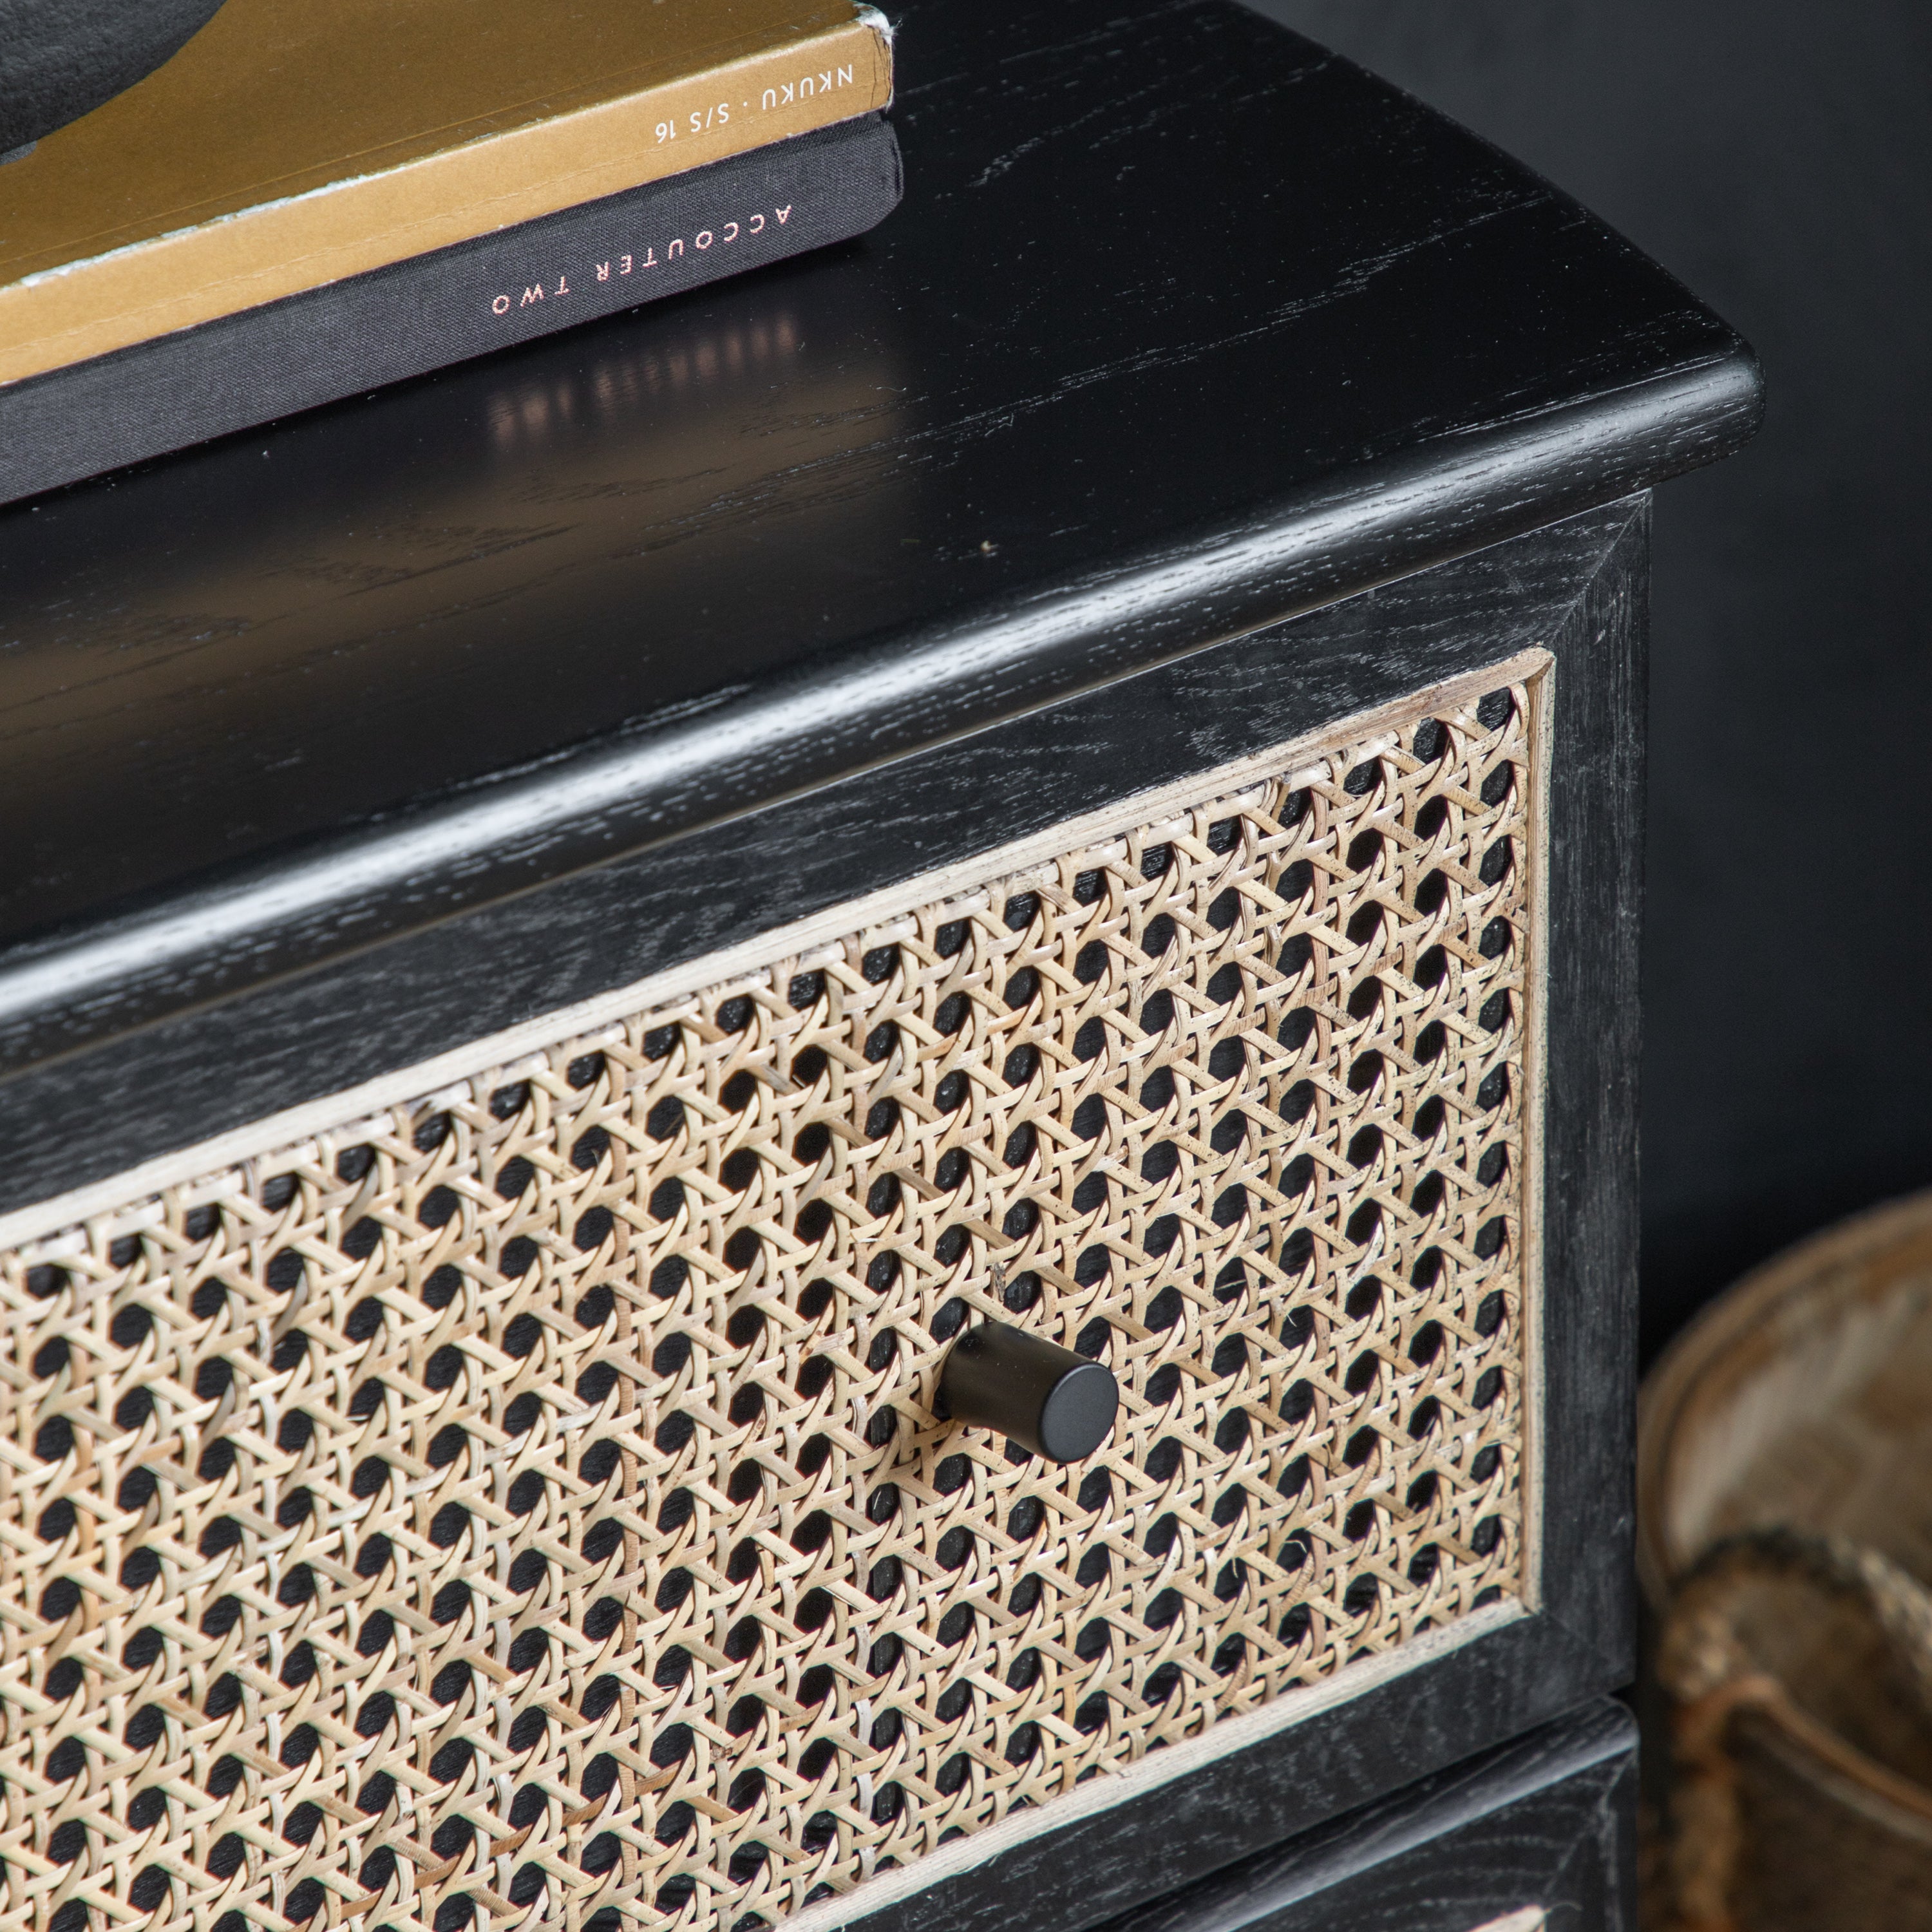 Hoxton Chest of Drawers in black oak with contrasting rattan drawer frontals | MalletandPlane.com